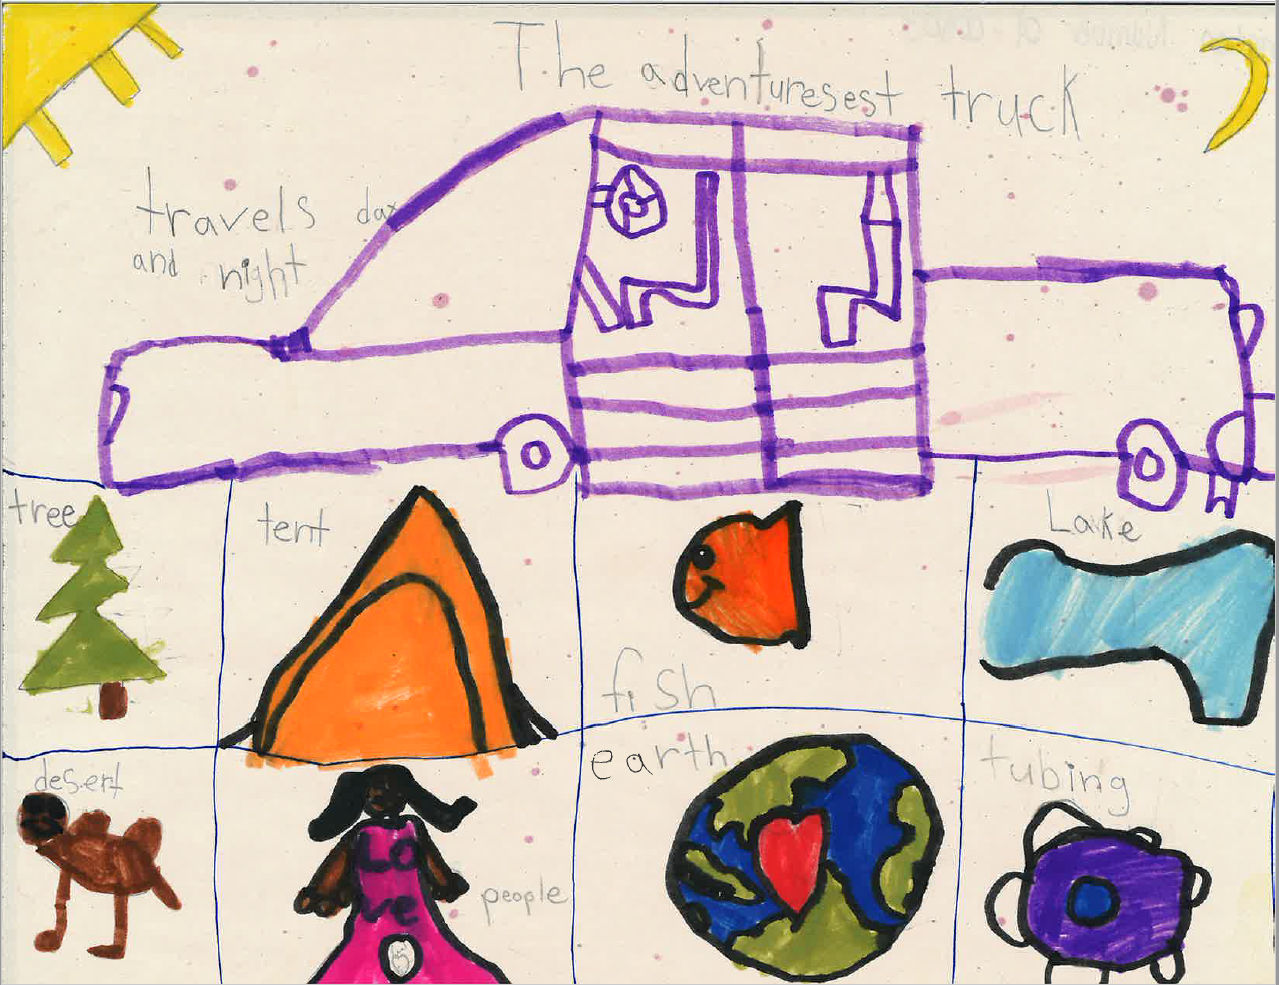 Elena’s entry – “The Adventuresest Truck”